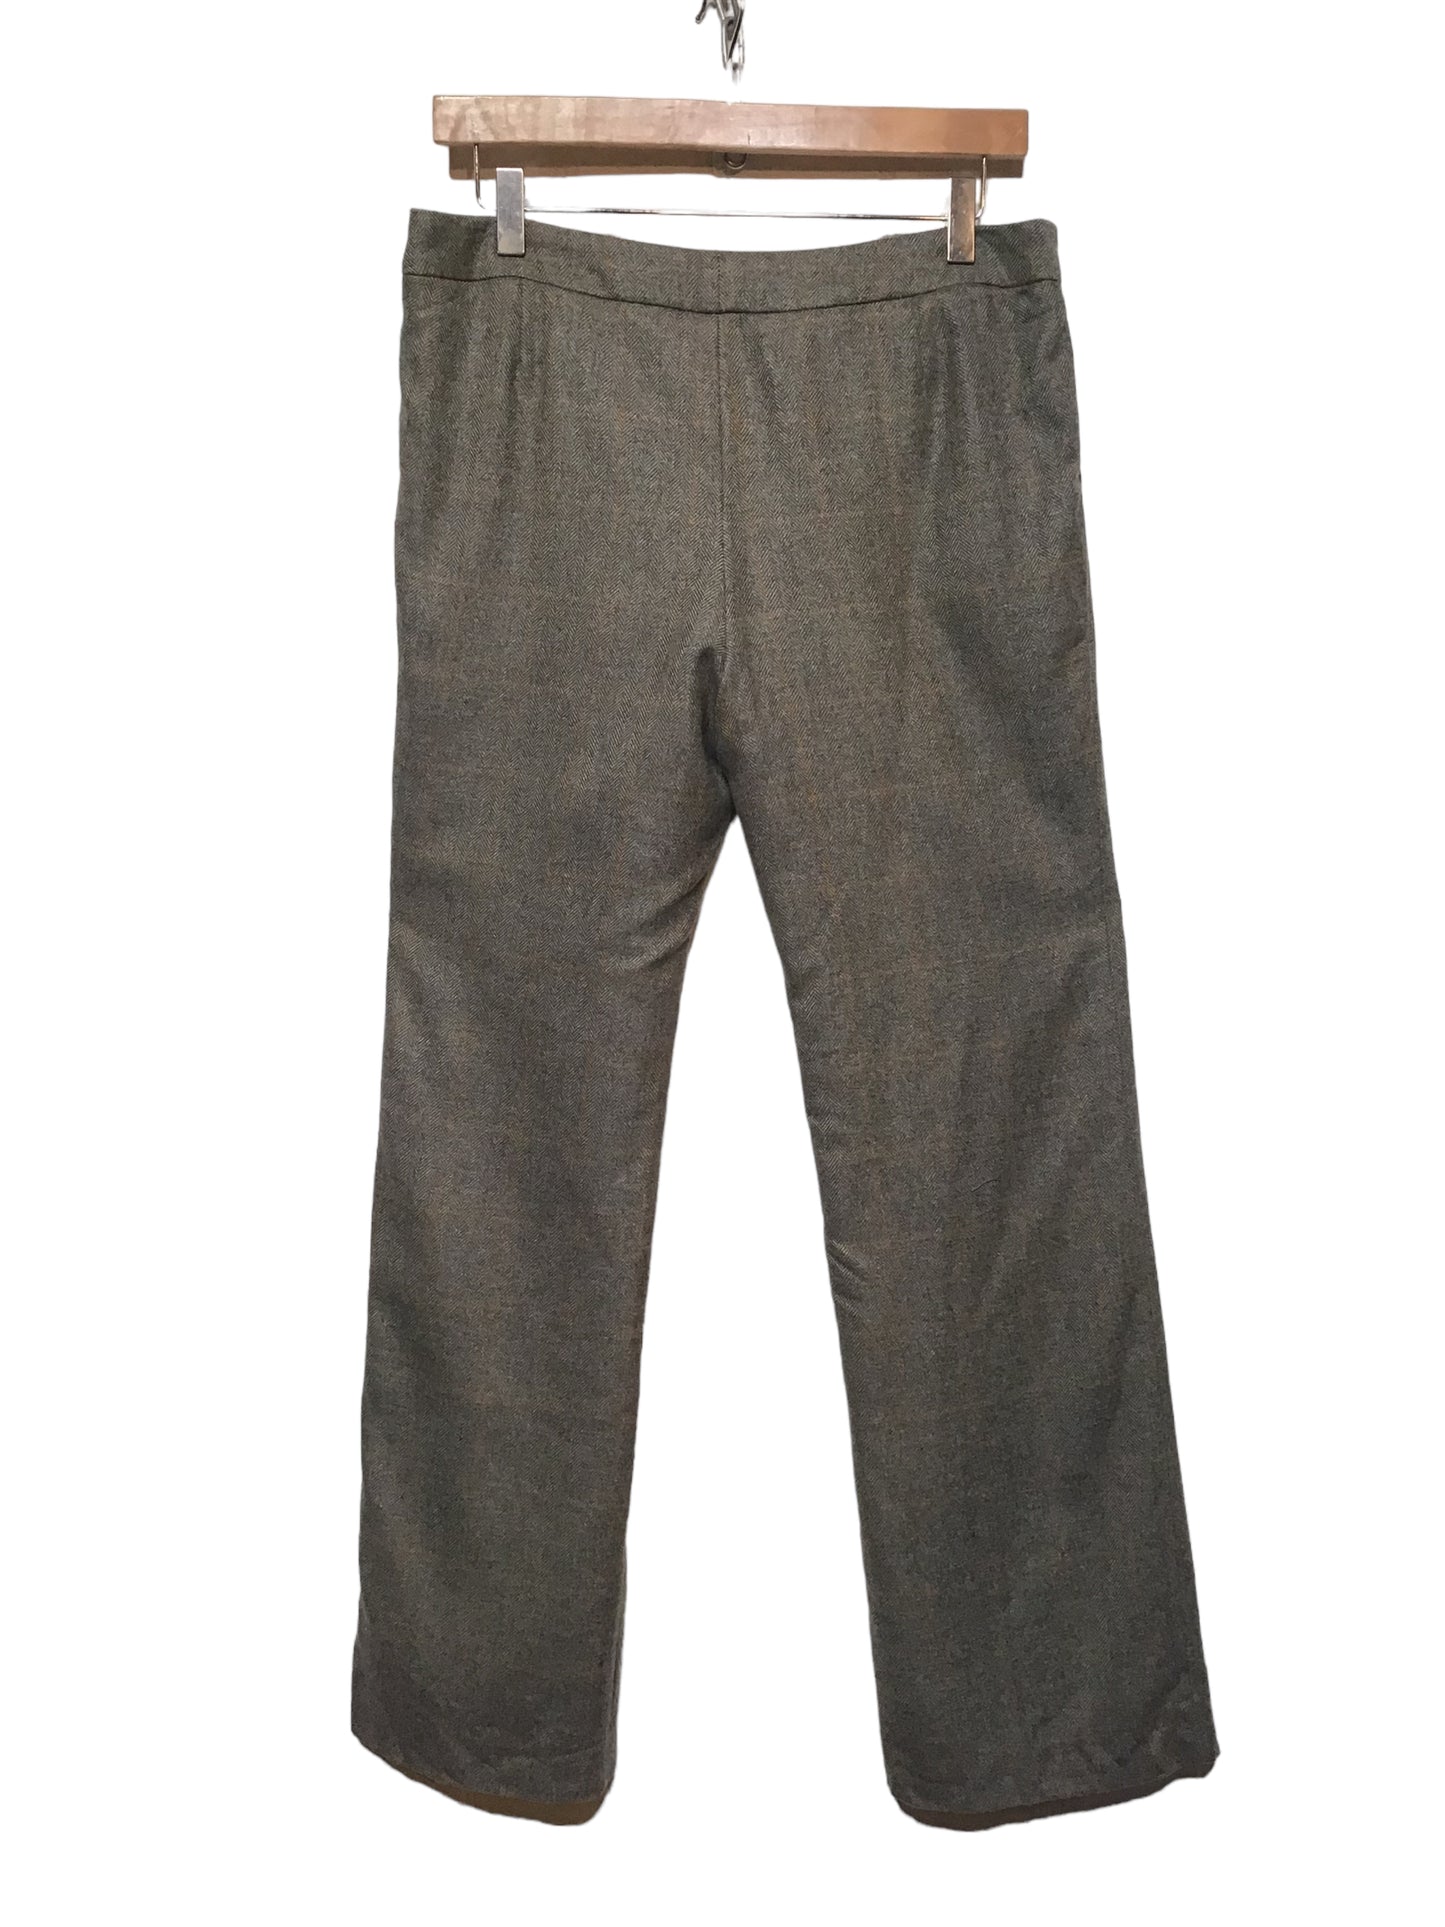 Chequered Thatched Trousers (33x29)